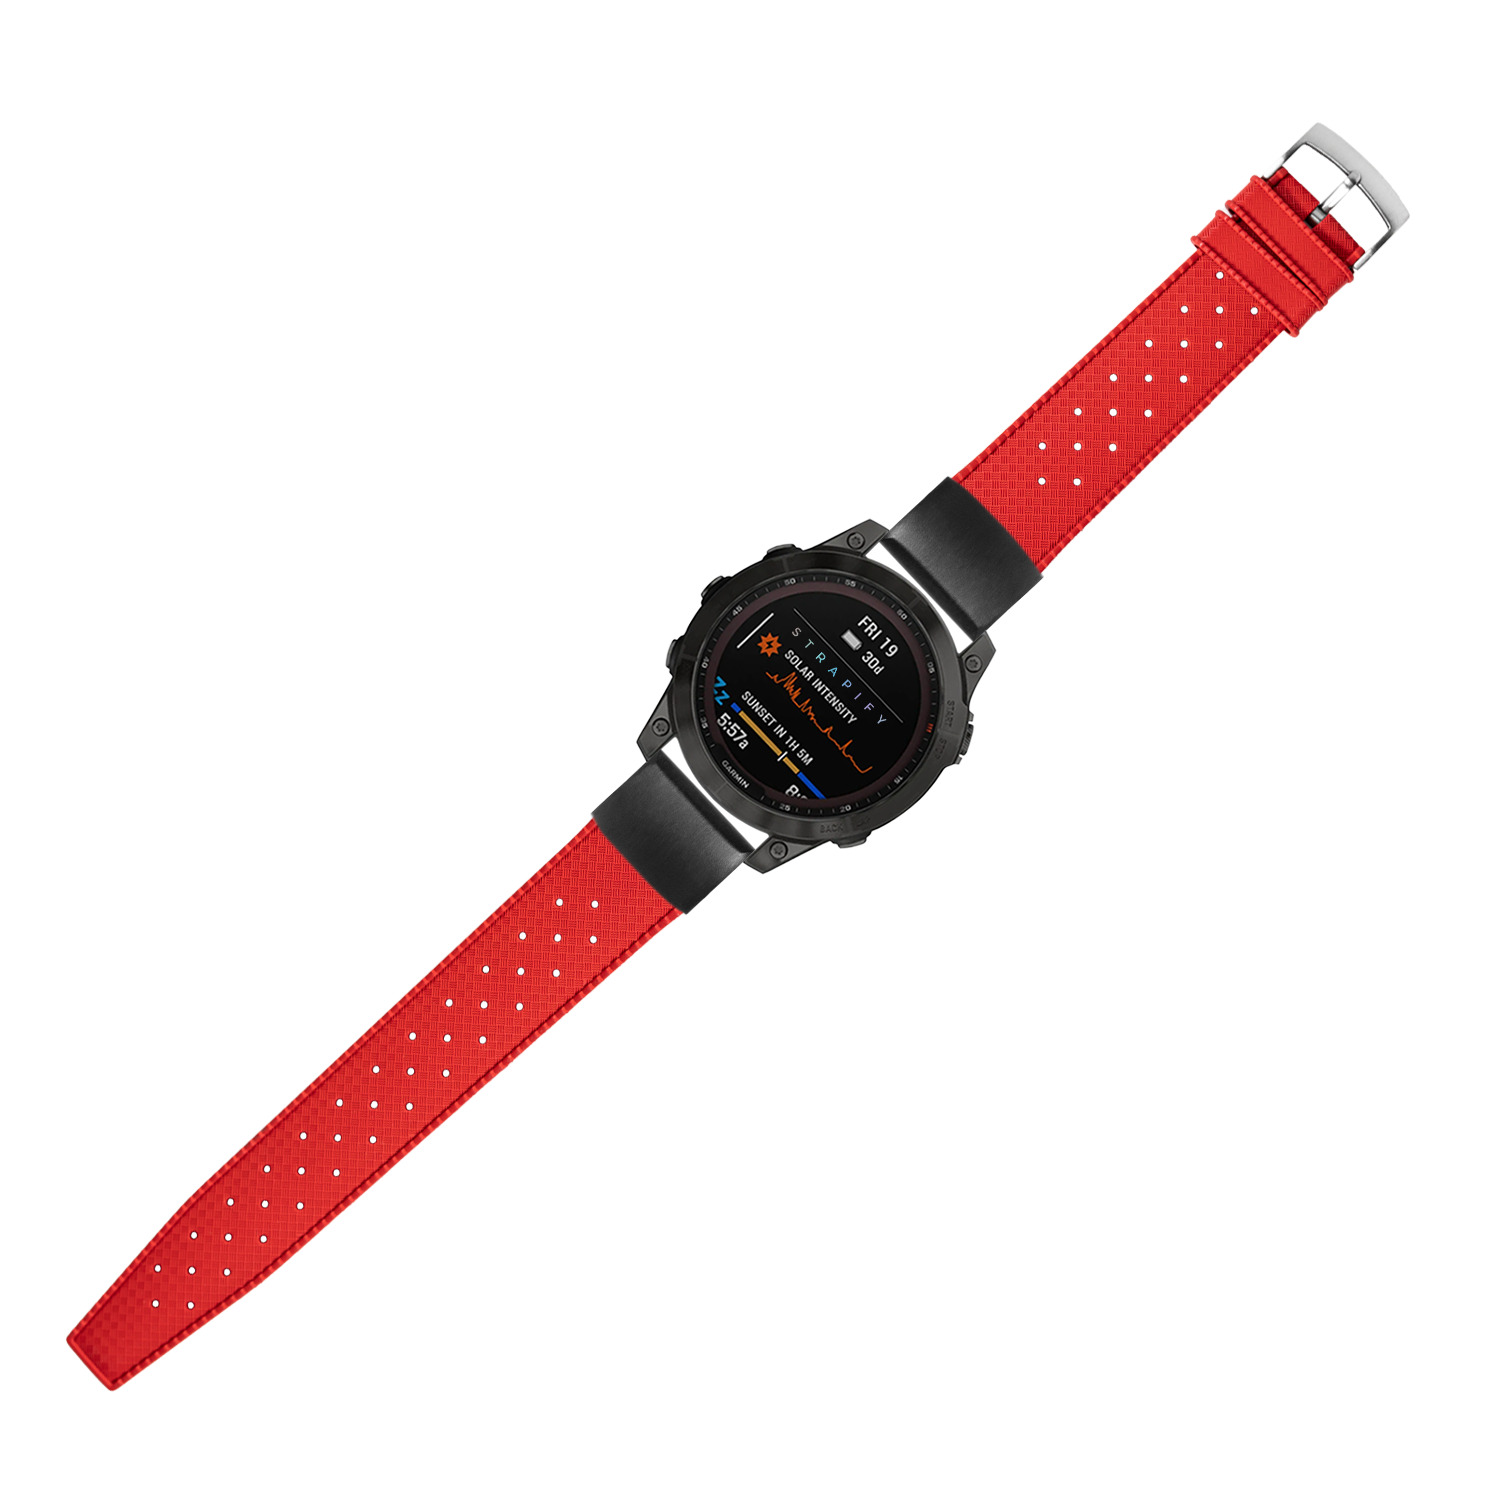 [QuickFit] King Tropic FKM Rubber - Red 20mm